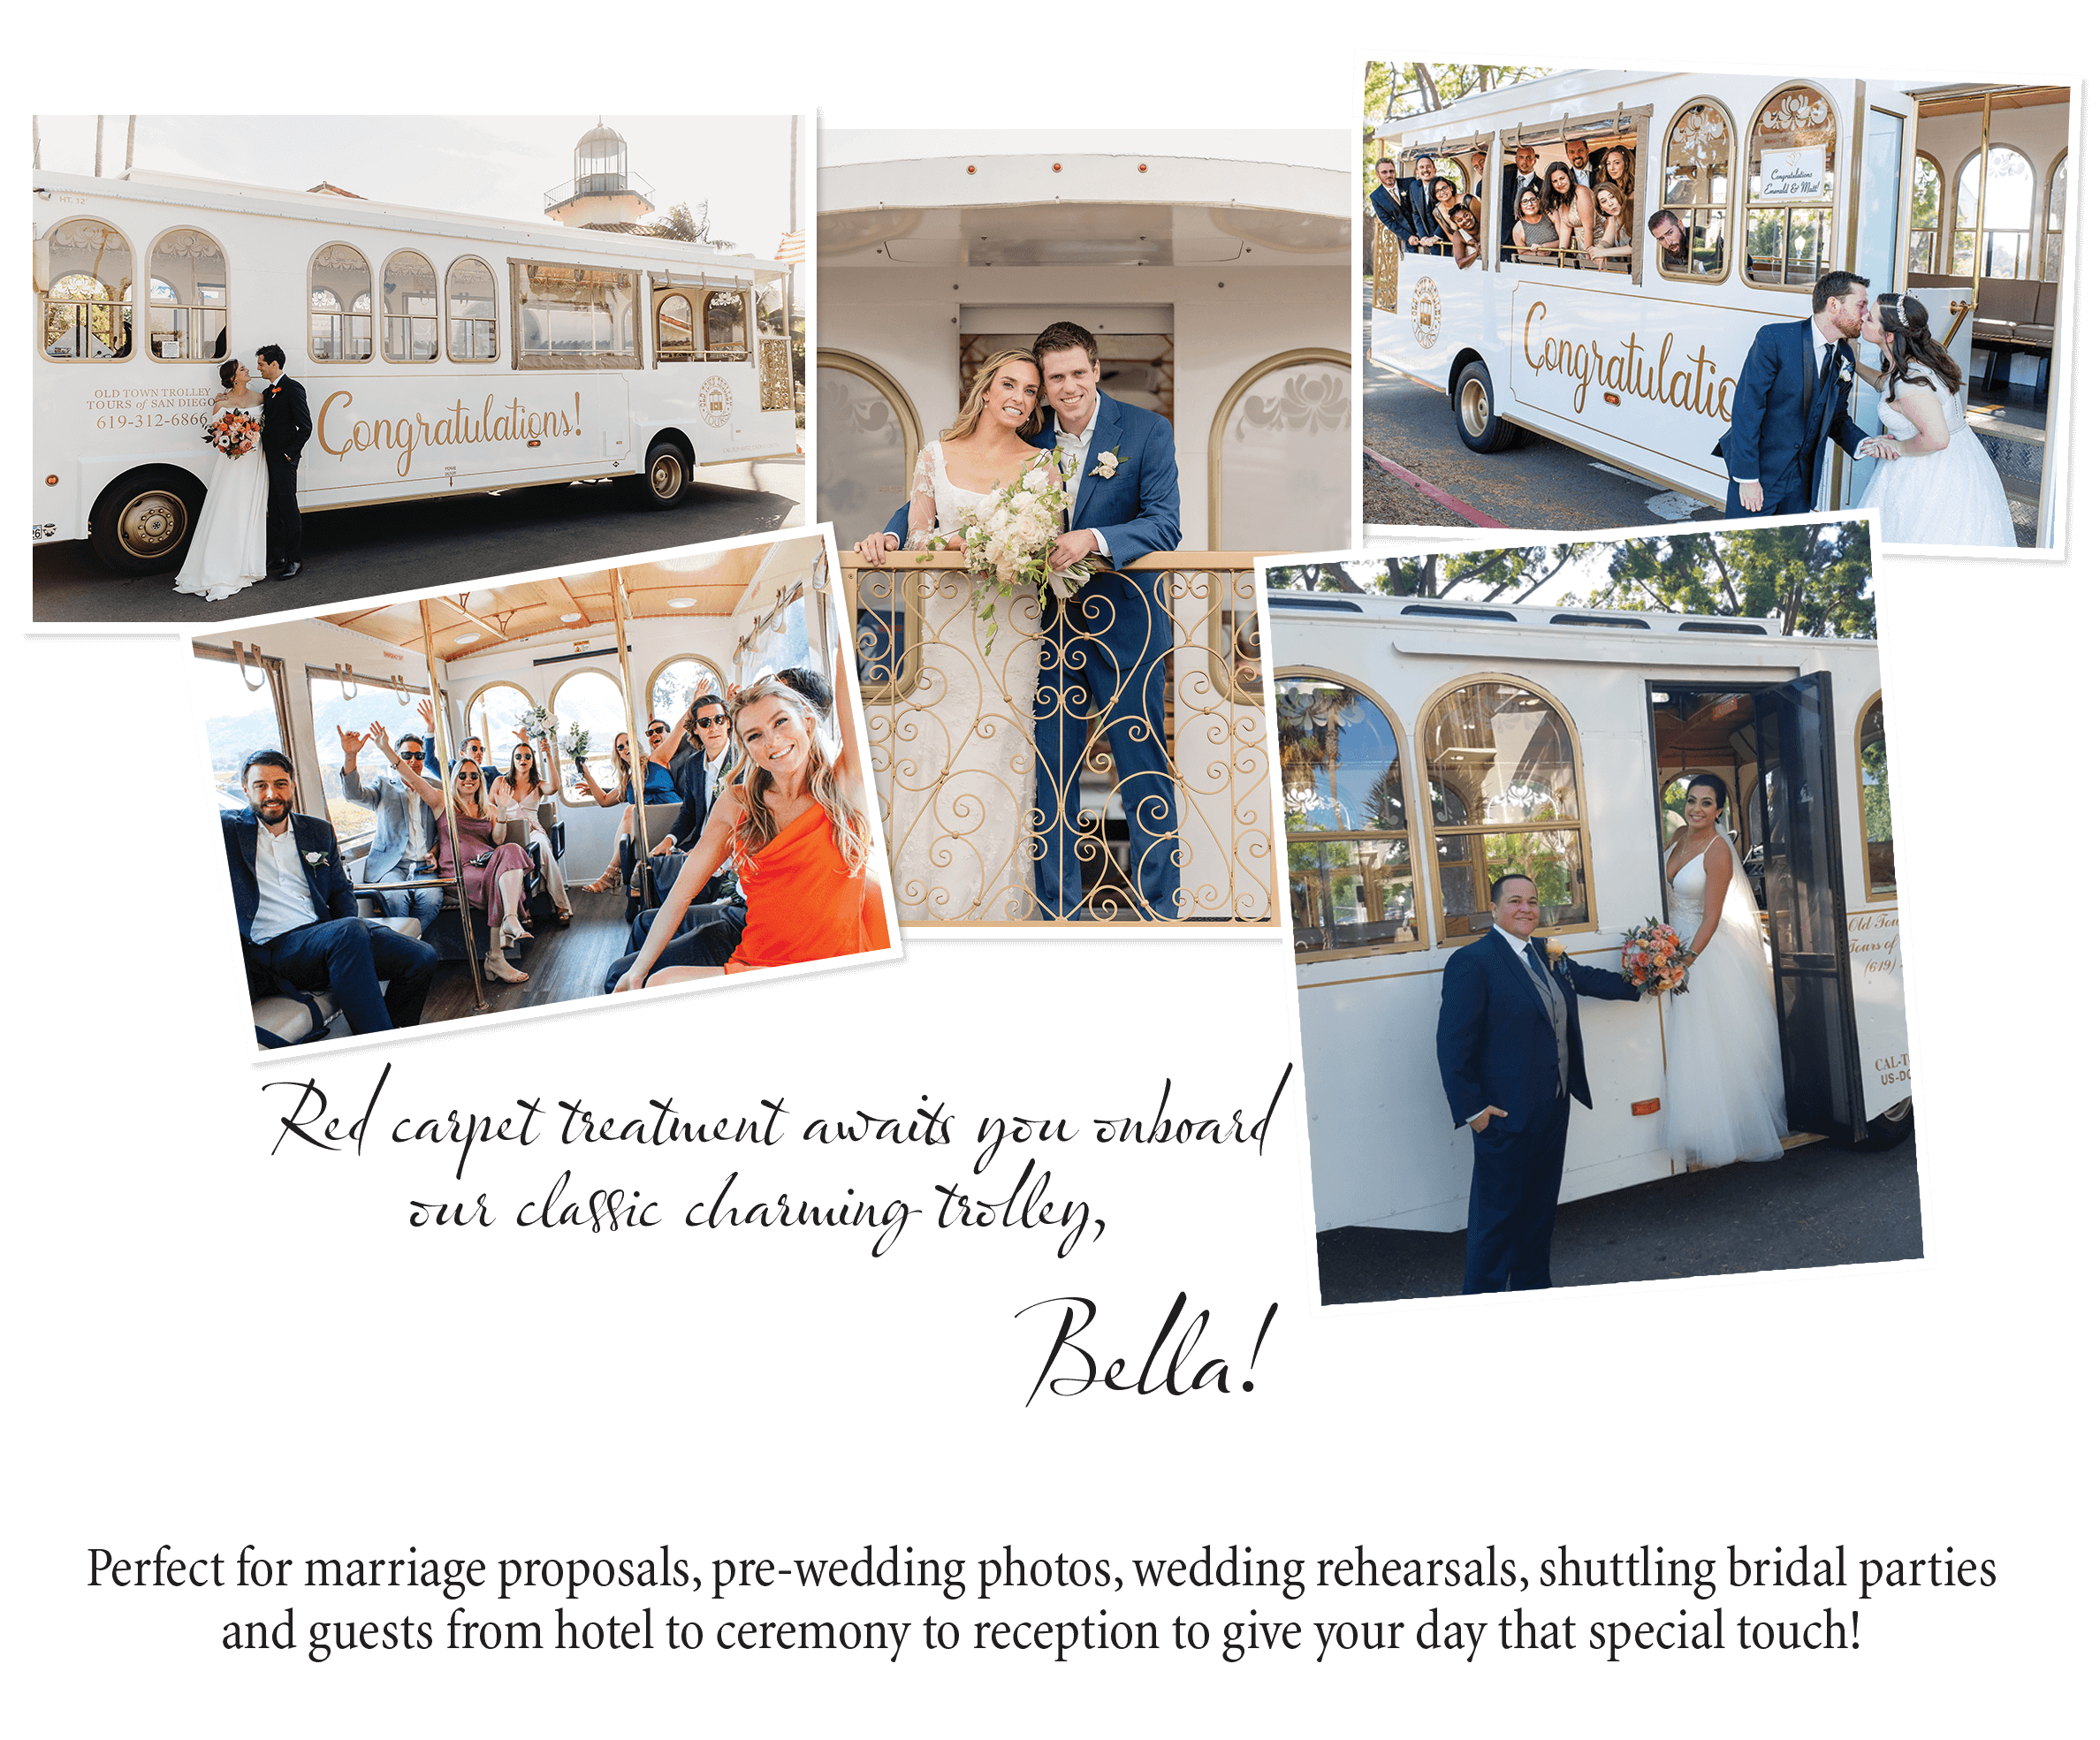 Collage of wedding photos: Wedding party, couple, trolley. And the words 'red carpet treatment awaits you onboard our classic charming trolley, Bella, perfect for marriage proposals, pre-wedding photos, wedding rehearsals, shuttling bridal parties, and guests from hotel to ceremony to reception to give your day that special touch!'